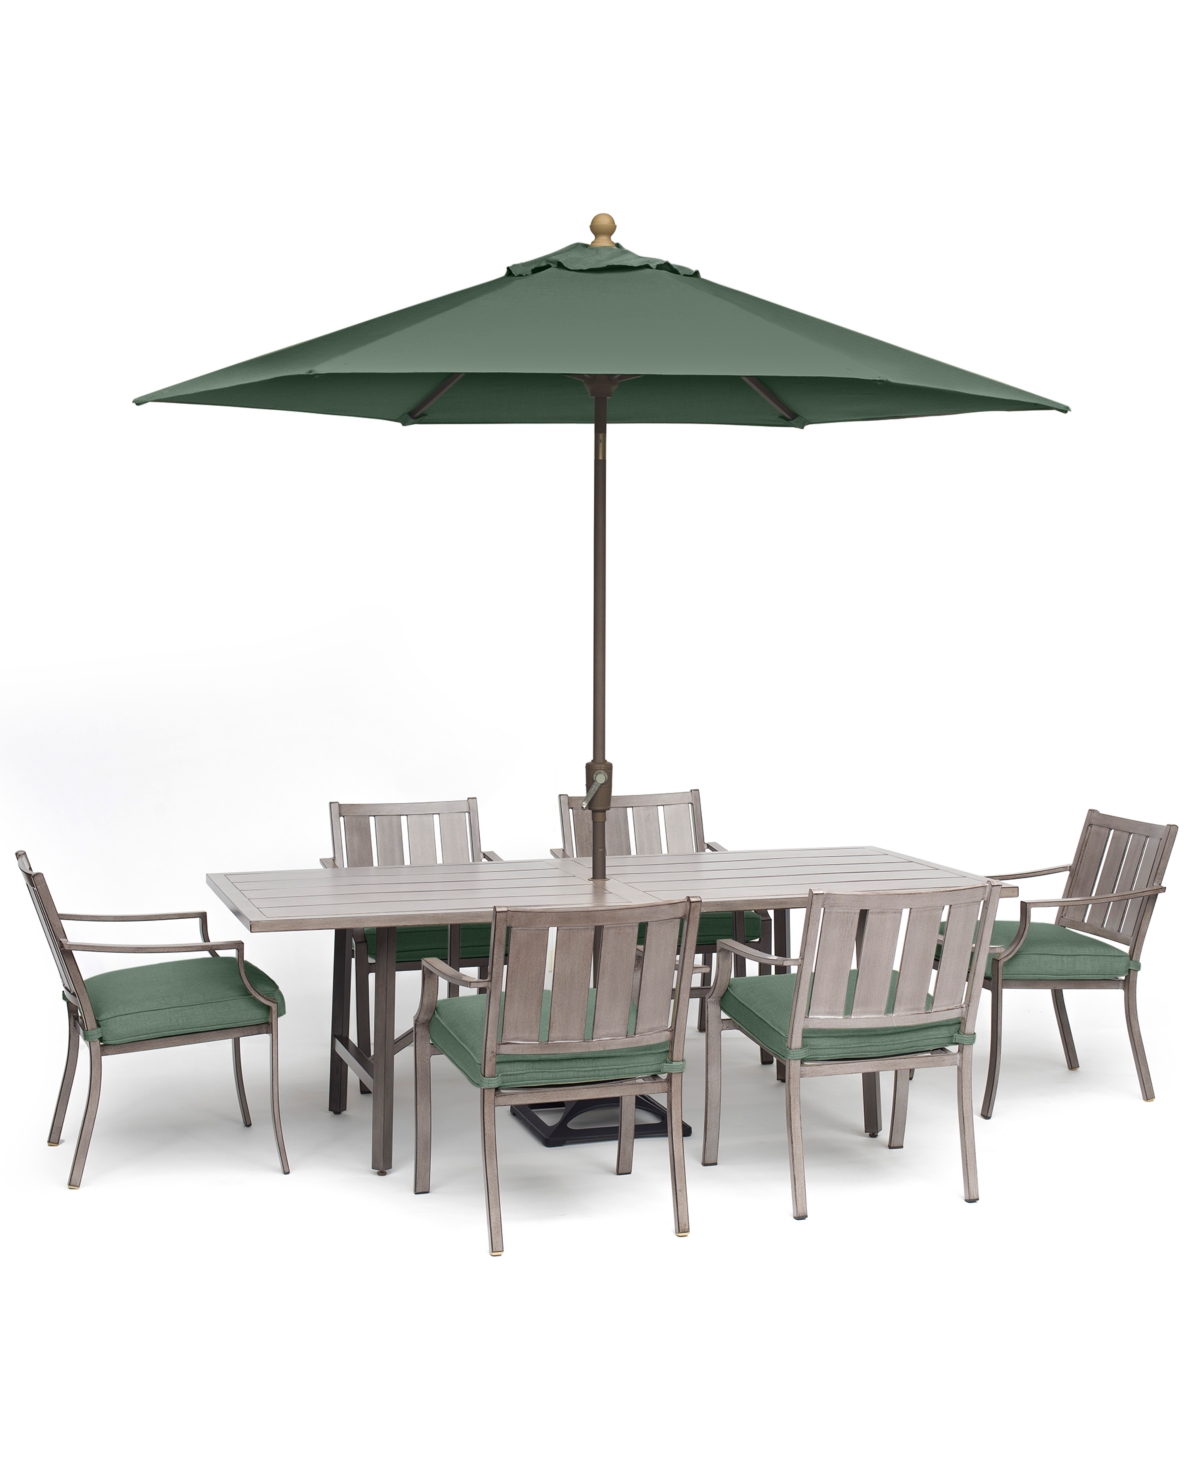 Agio Wayland Outdoor Aluminum 7-pc. Dining Set (84" X 42" Rectangle Dining Table & 6 Dining Chairs), Crea In Outdura Grasshopper